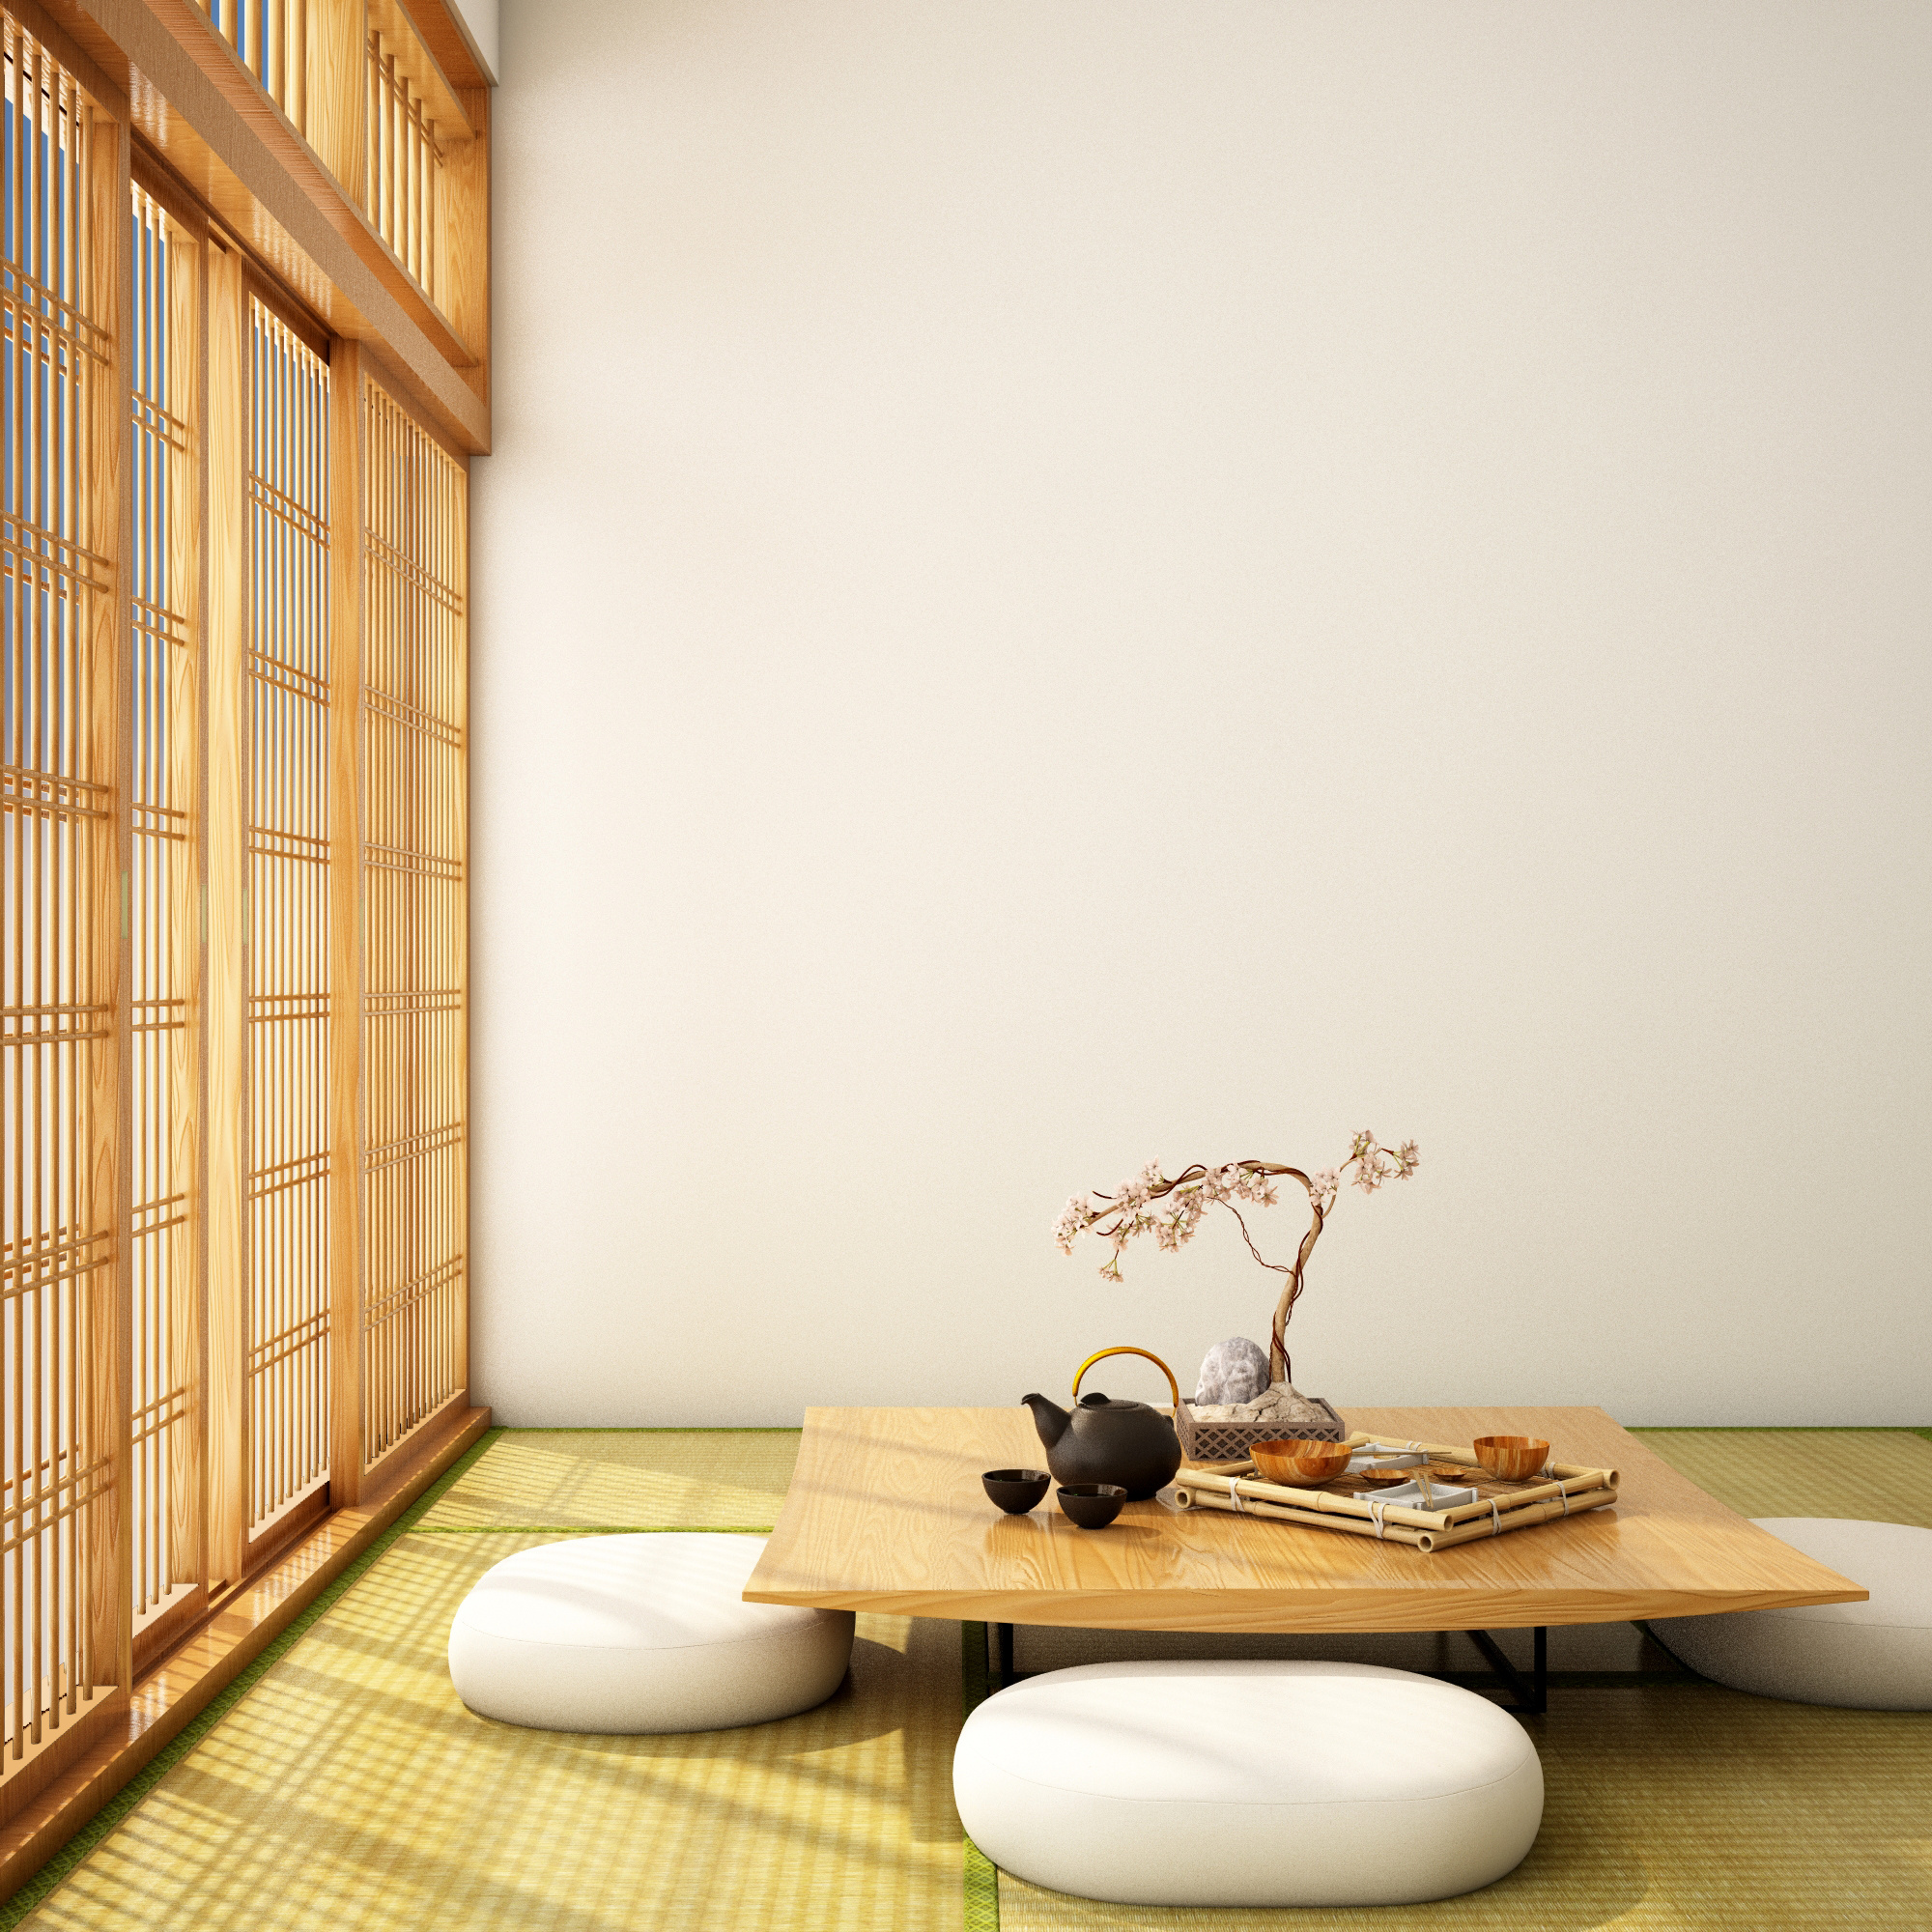 15 Best Japanese Furniture Of All Time | Storables